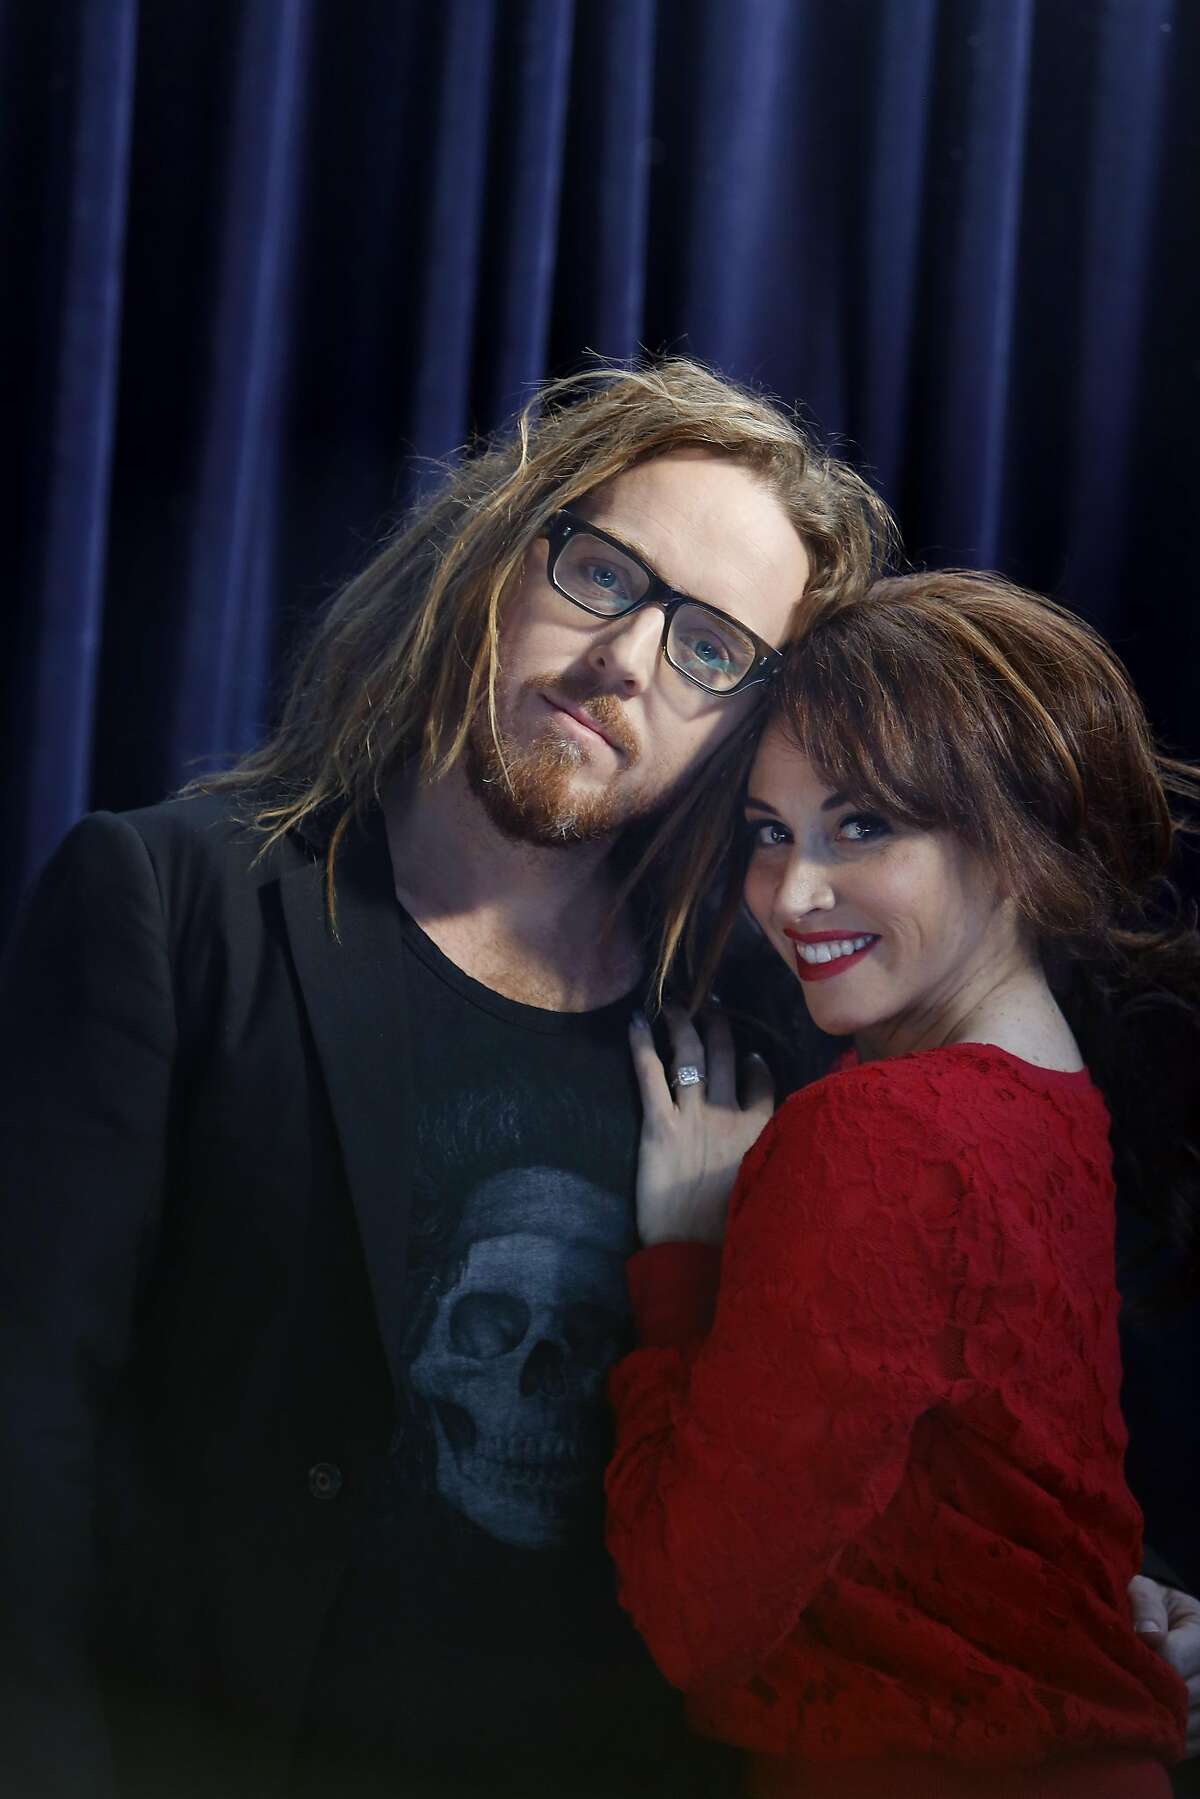 Tim Minchin (l to r), music and lyrics Matilda The Musical, and Lesli Margherita, Mrs. Wormwood Matilda The Musical, pose together for a portrait at the Orpheum Theater on Monday, January 26, 2014 in San Francisco, Calif.